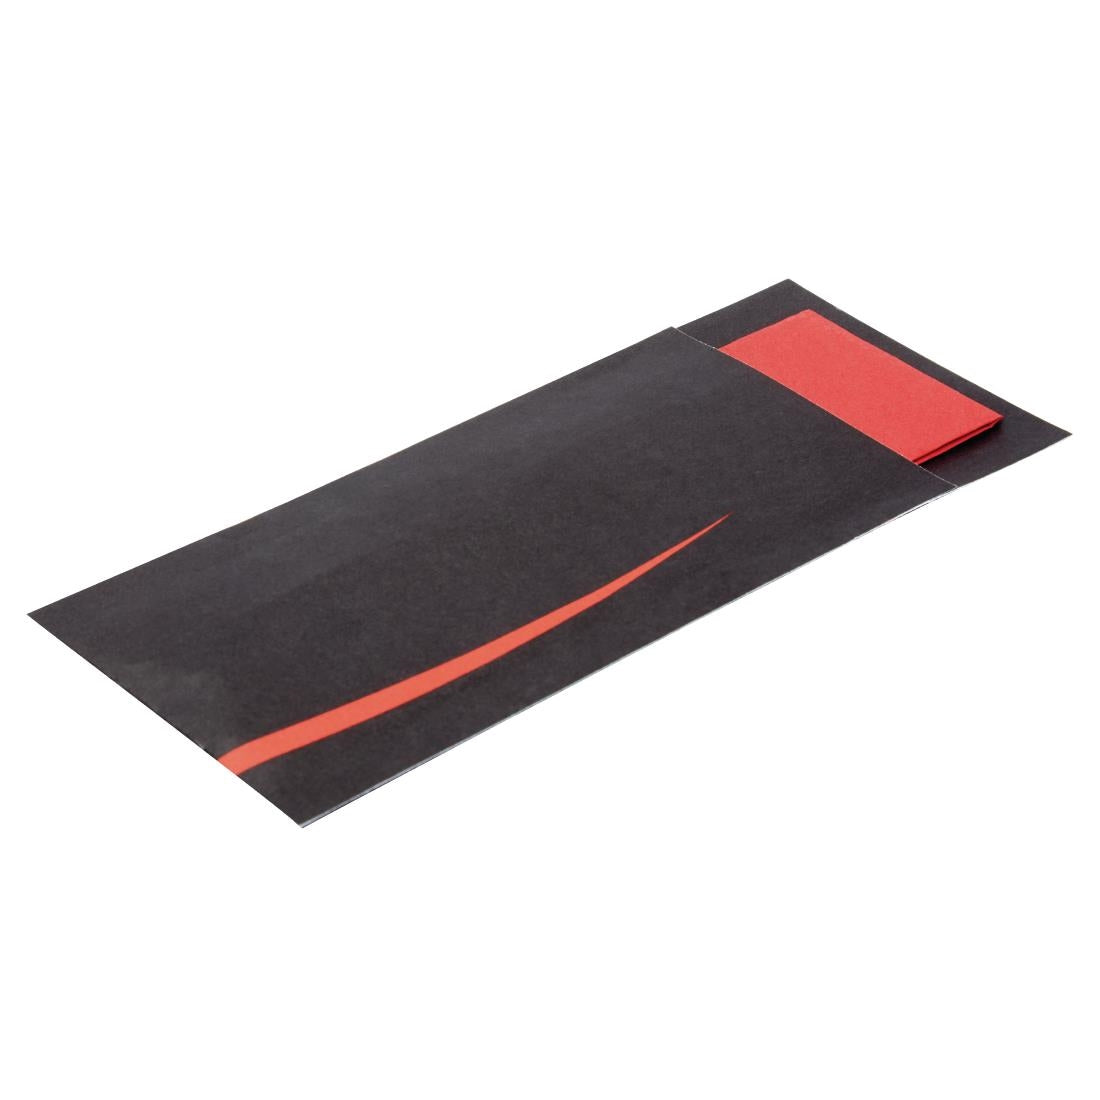 CK239 Europochette Bari Black Cutlery Pouch with Red Napkin (Pack of 100) JD Catering Equipment Solutions Ltd